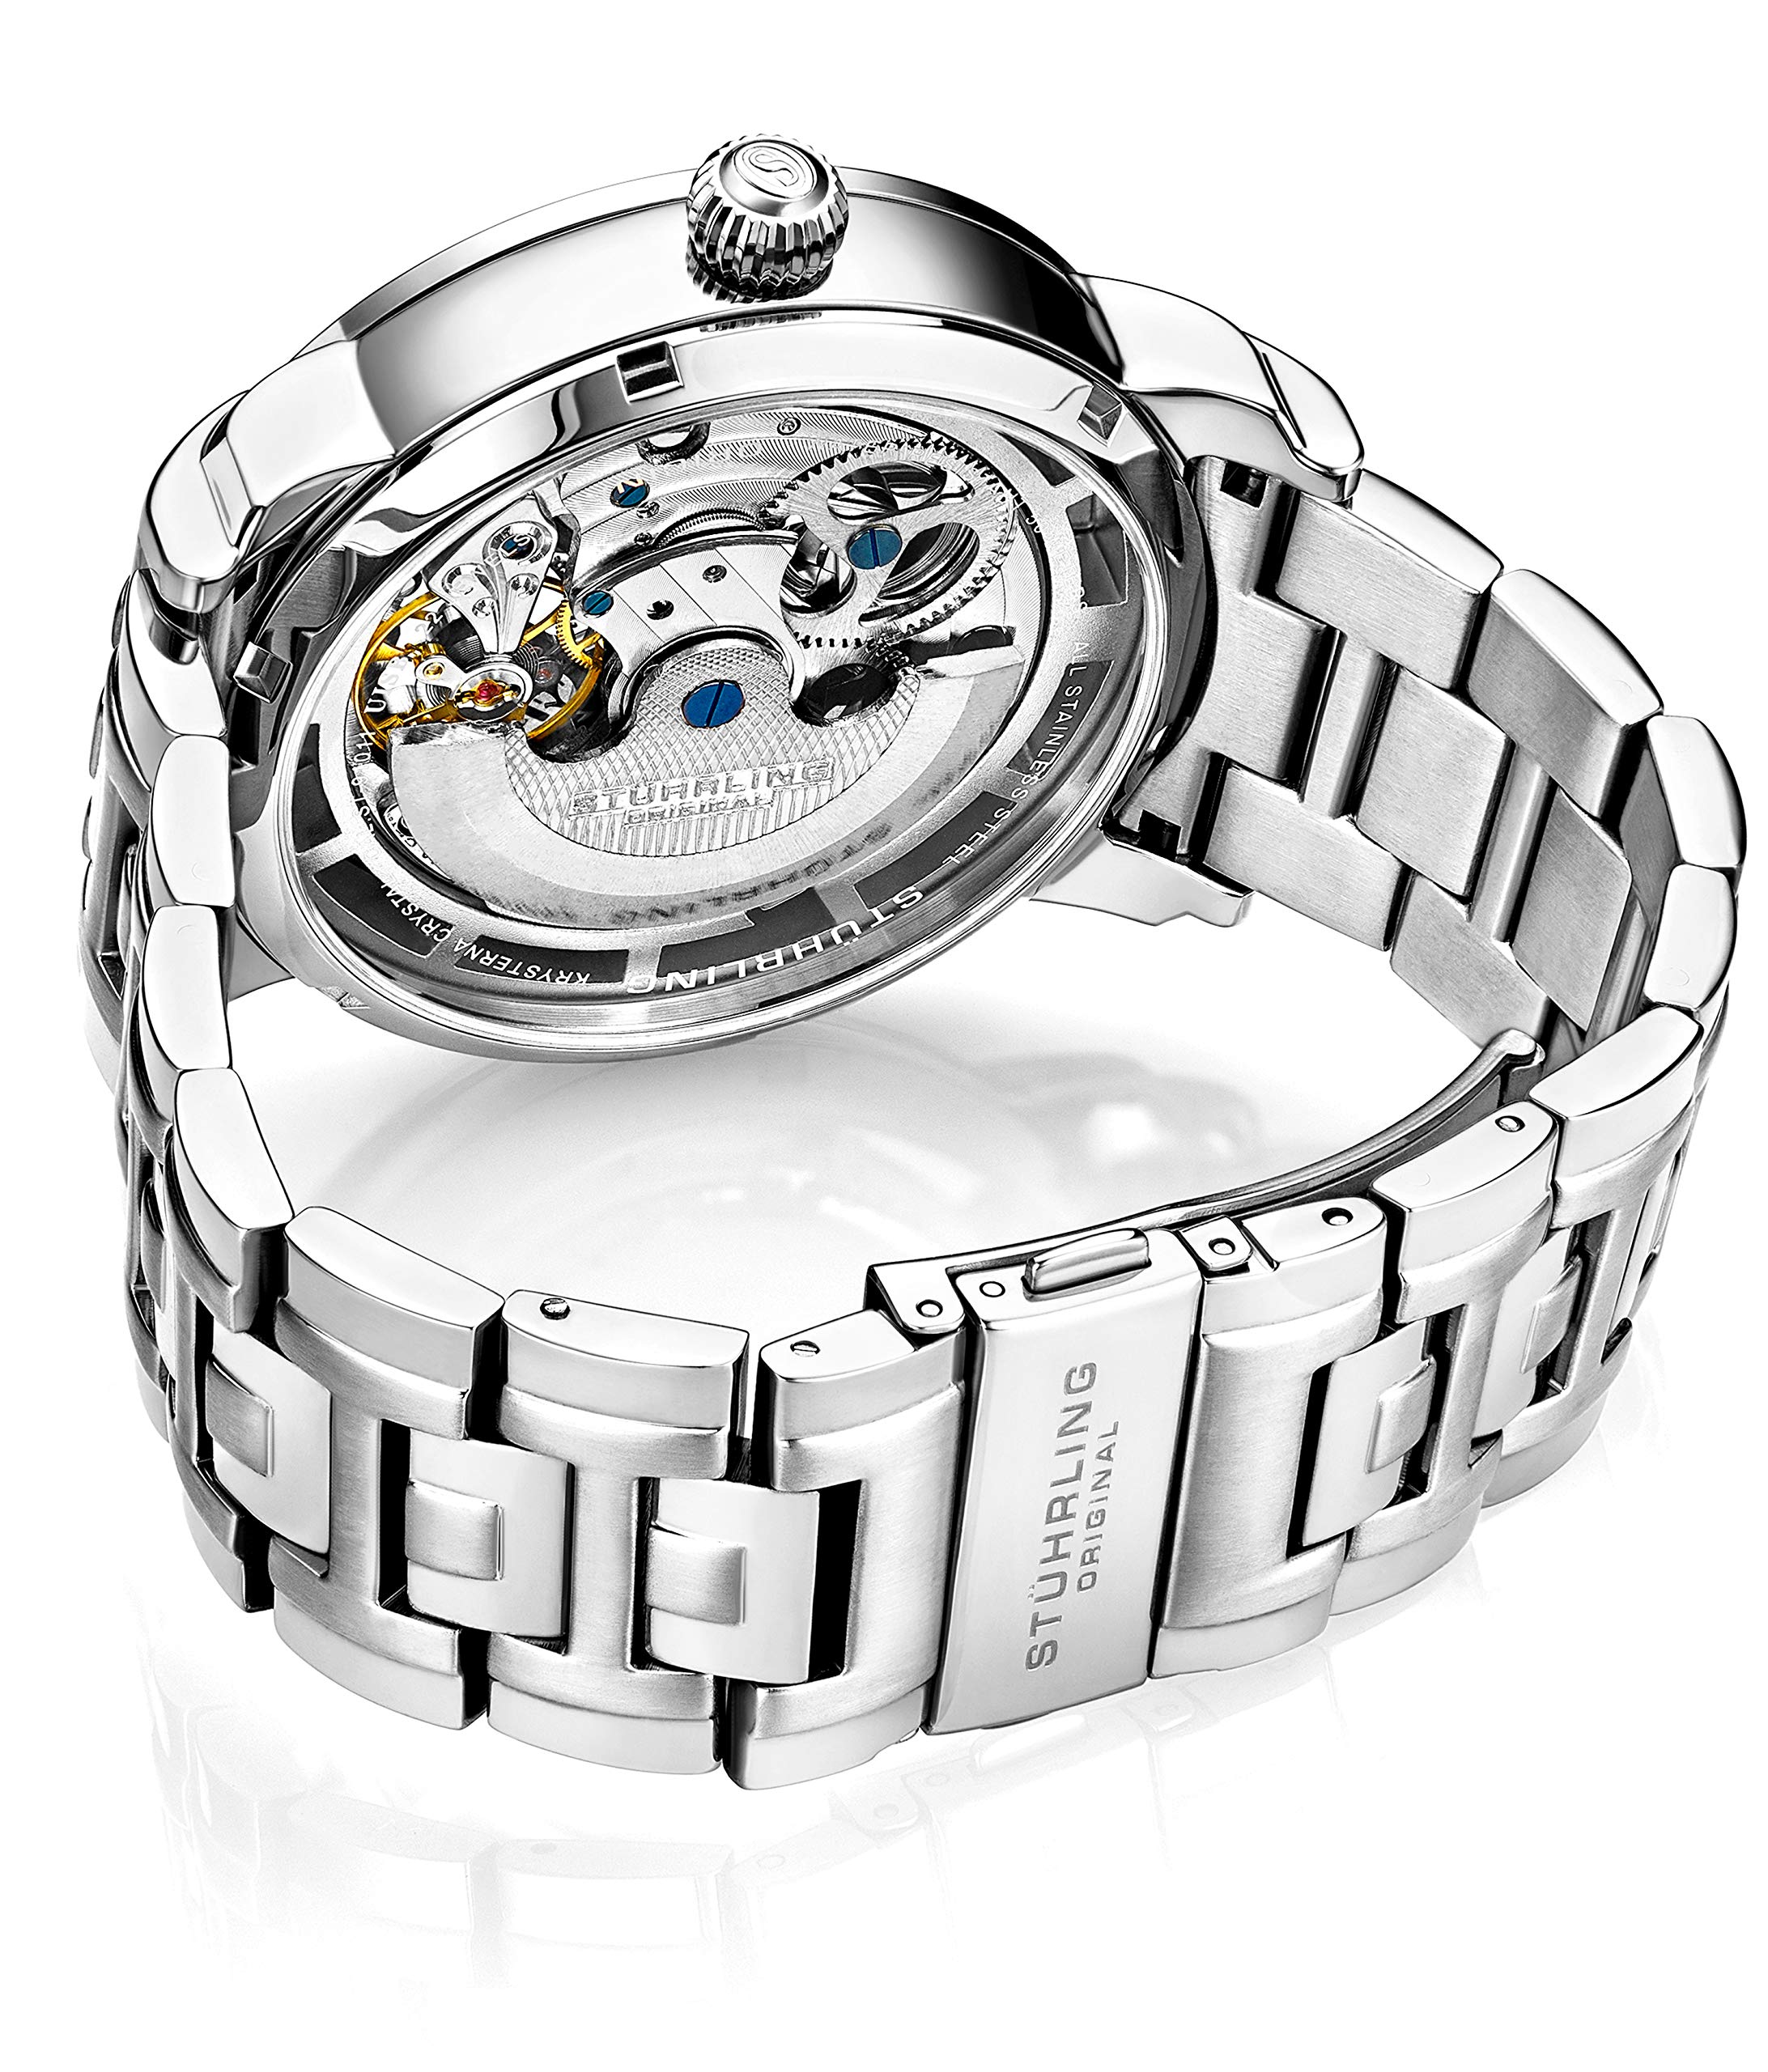 Stührling Original Mens Watch Stainless Steel Automatic, Silver Skeleton Dial, Dual Time, AM/PM Sun Moon, Stainless Steel Bracelet, 371B Watches for Men Series